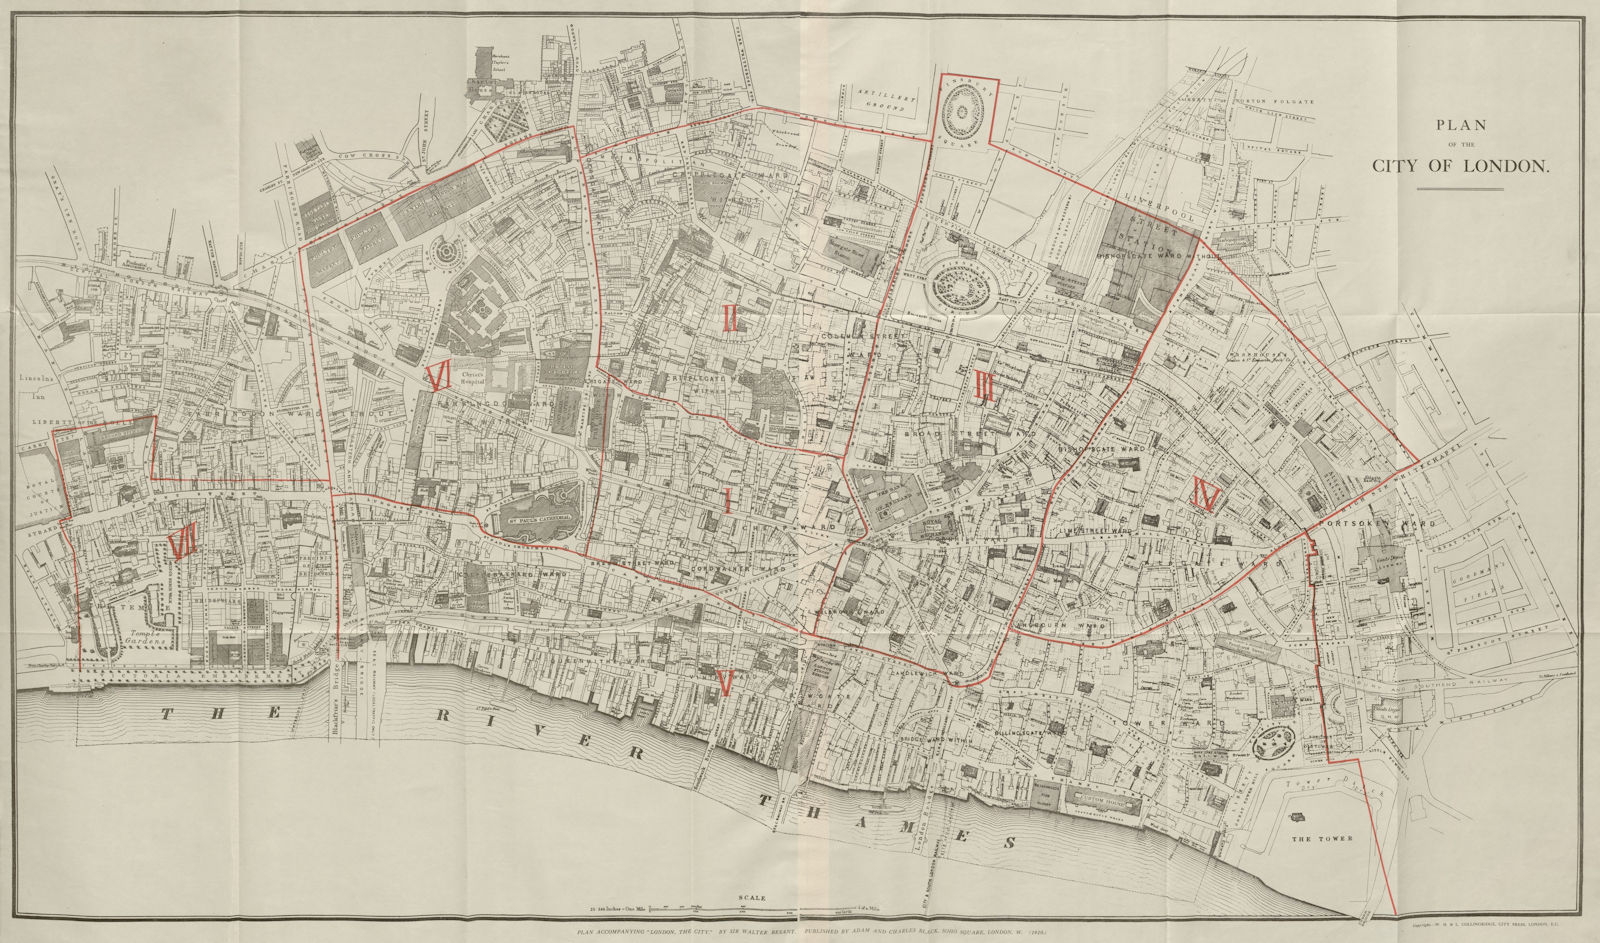 Associate Product Plan of the City of London, by Walter Besant. LARGE 128x76 cm 1910 old map